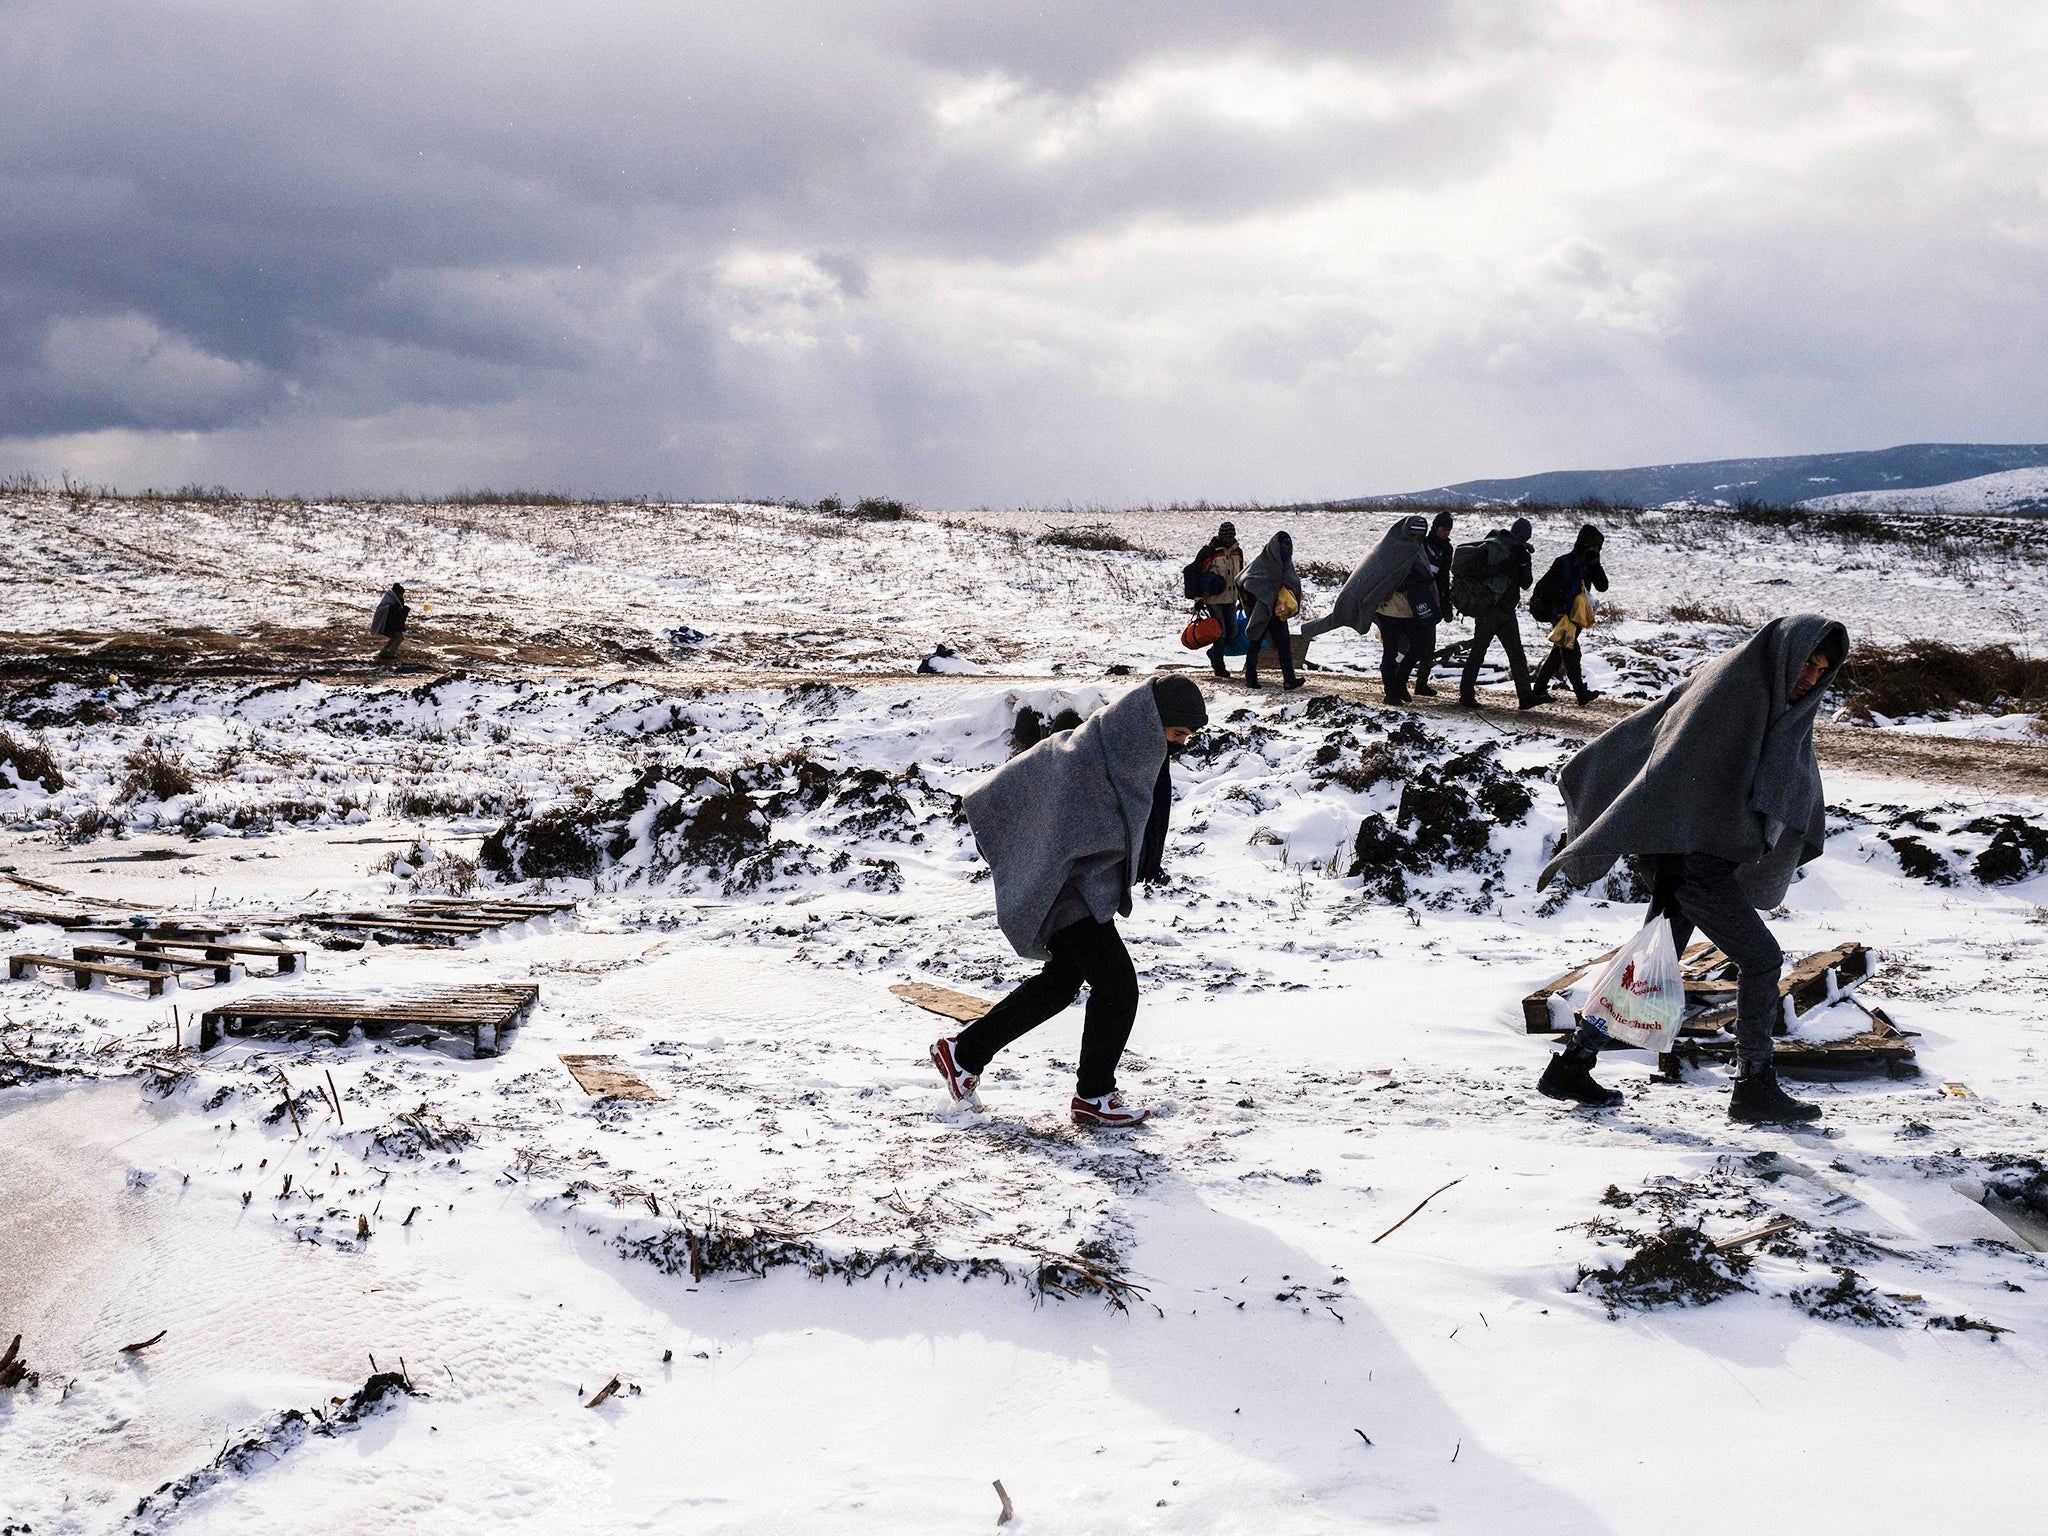 Refugees use their sleeping blankets to keep warm as they walk along snow covered fields after crossing the Macedonian border into Serbia, near the village of Miratovac